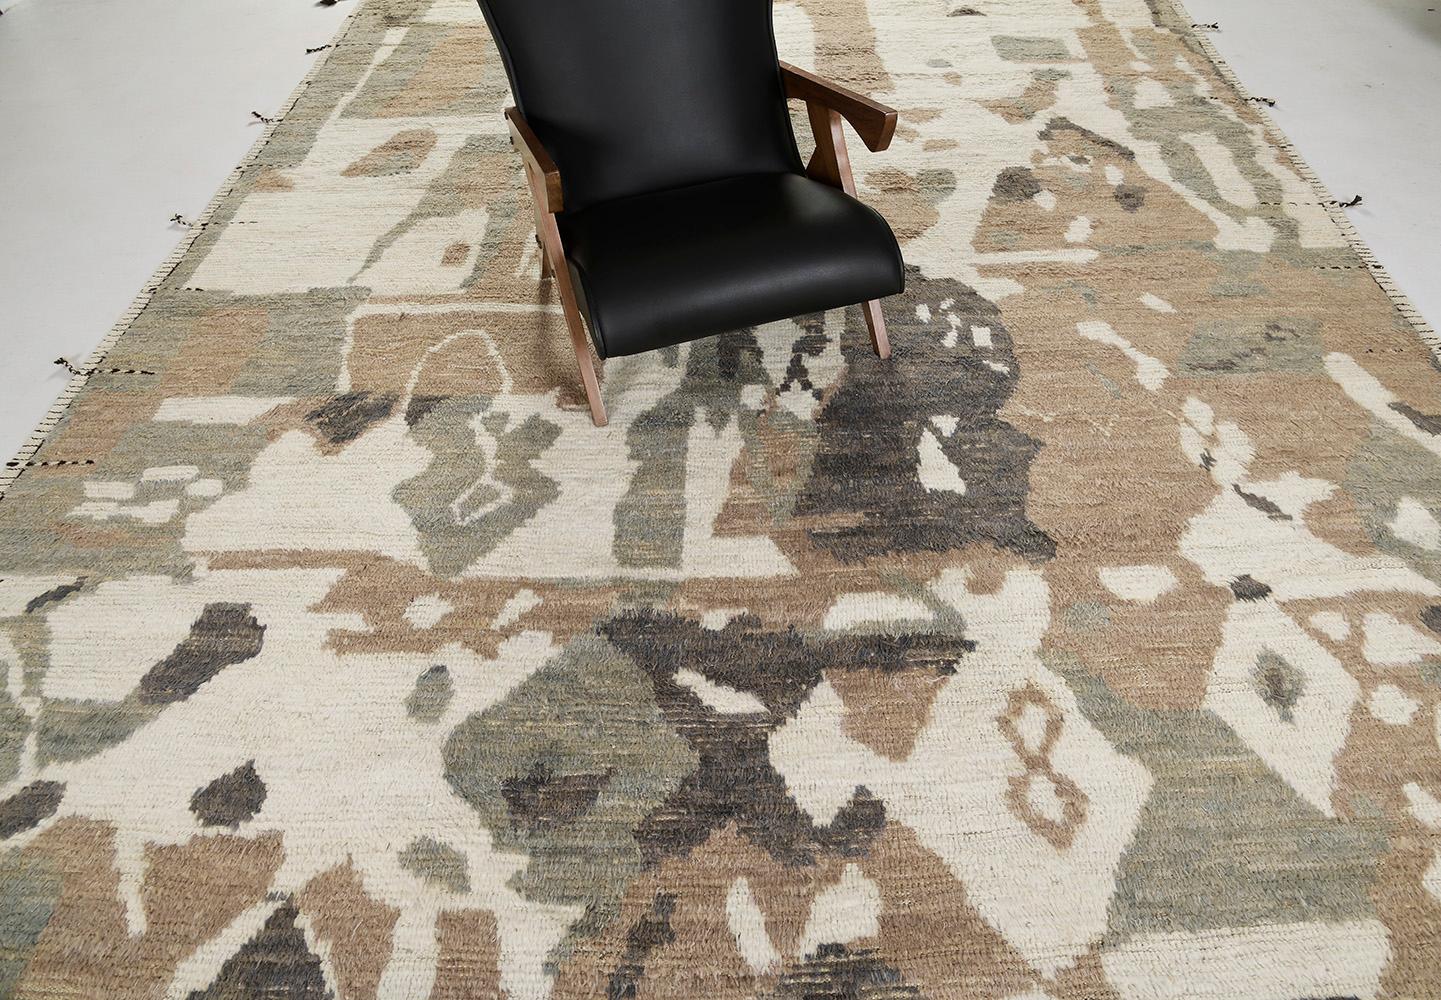 Tazekka is made of impressive wool and is made of timeless design elements. Its weaving of neutral tones with muted pigments of gold and remarkable design is what makes the Atlas Collection so unique and sought after. Mehraban's Atlas collection is